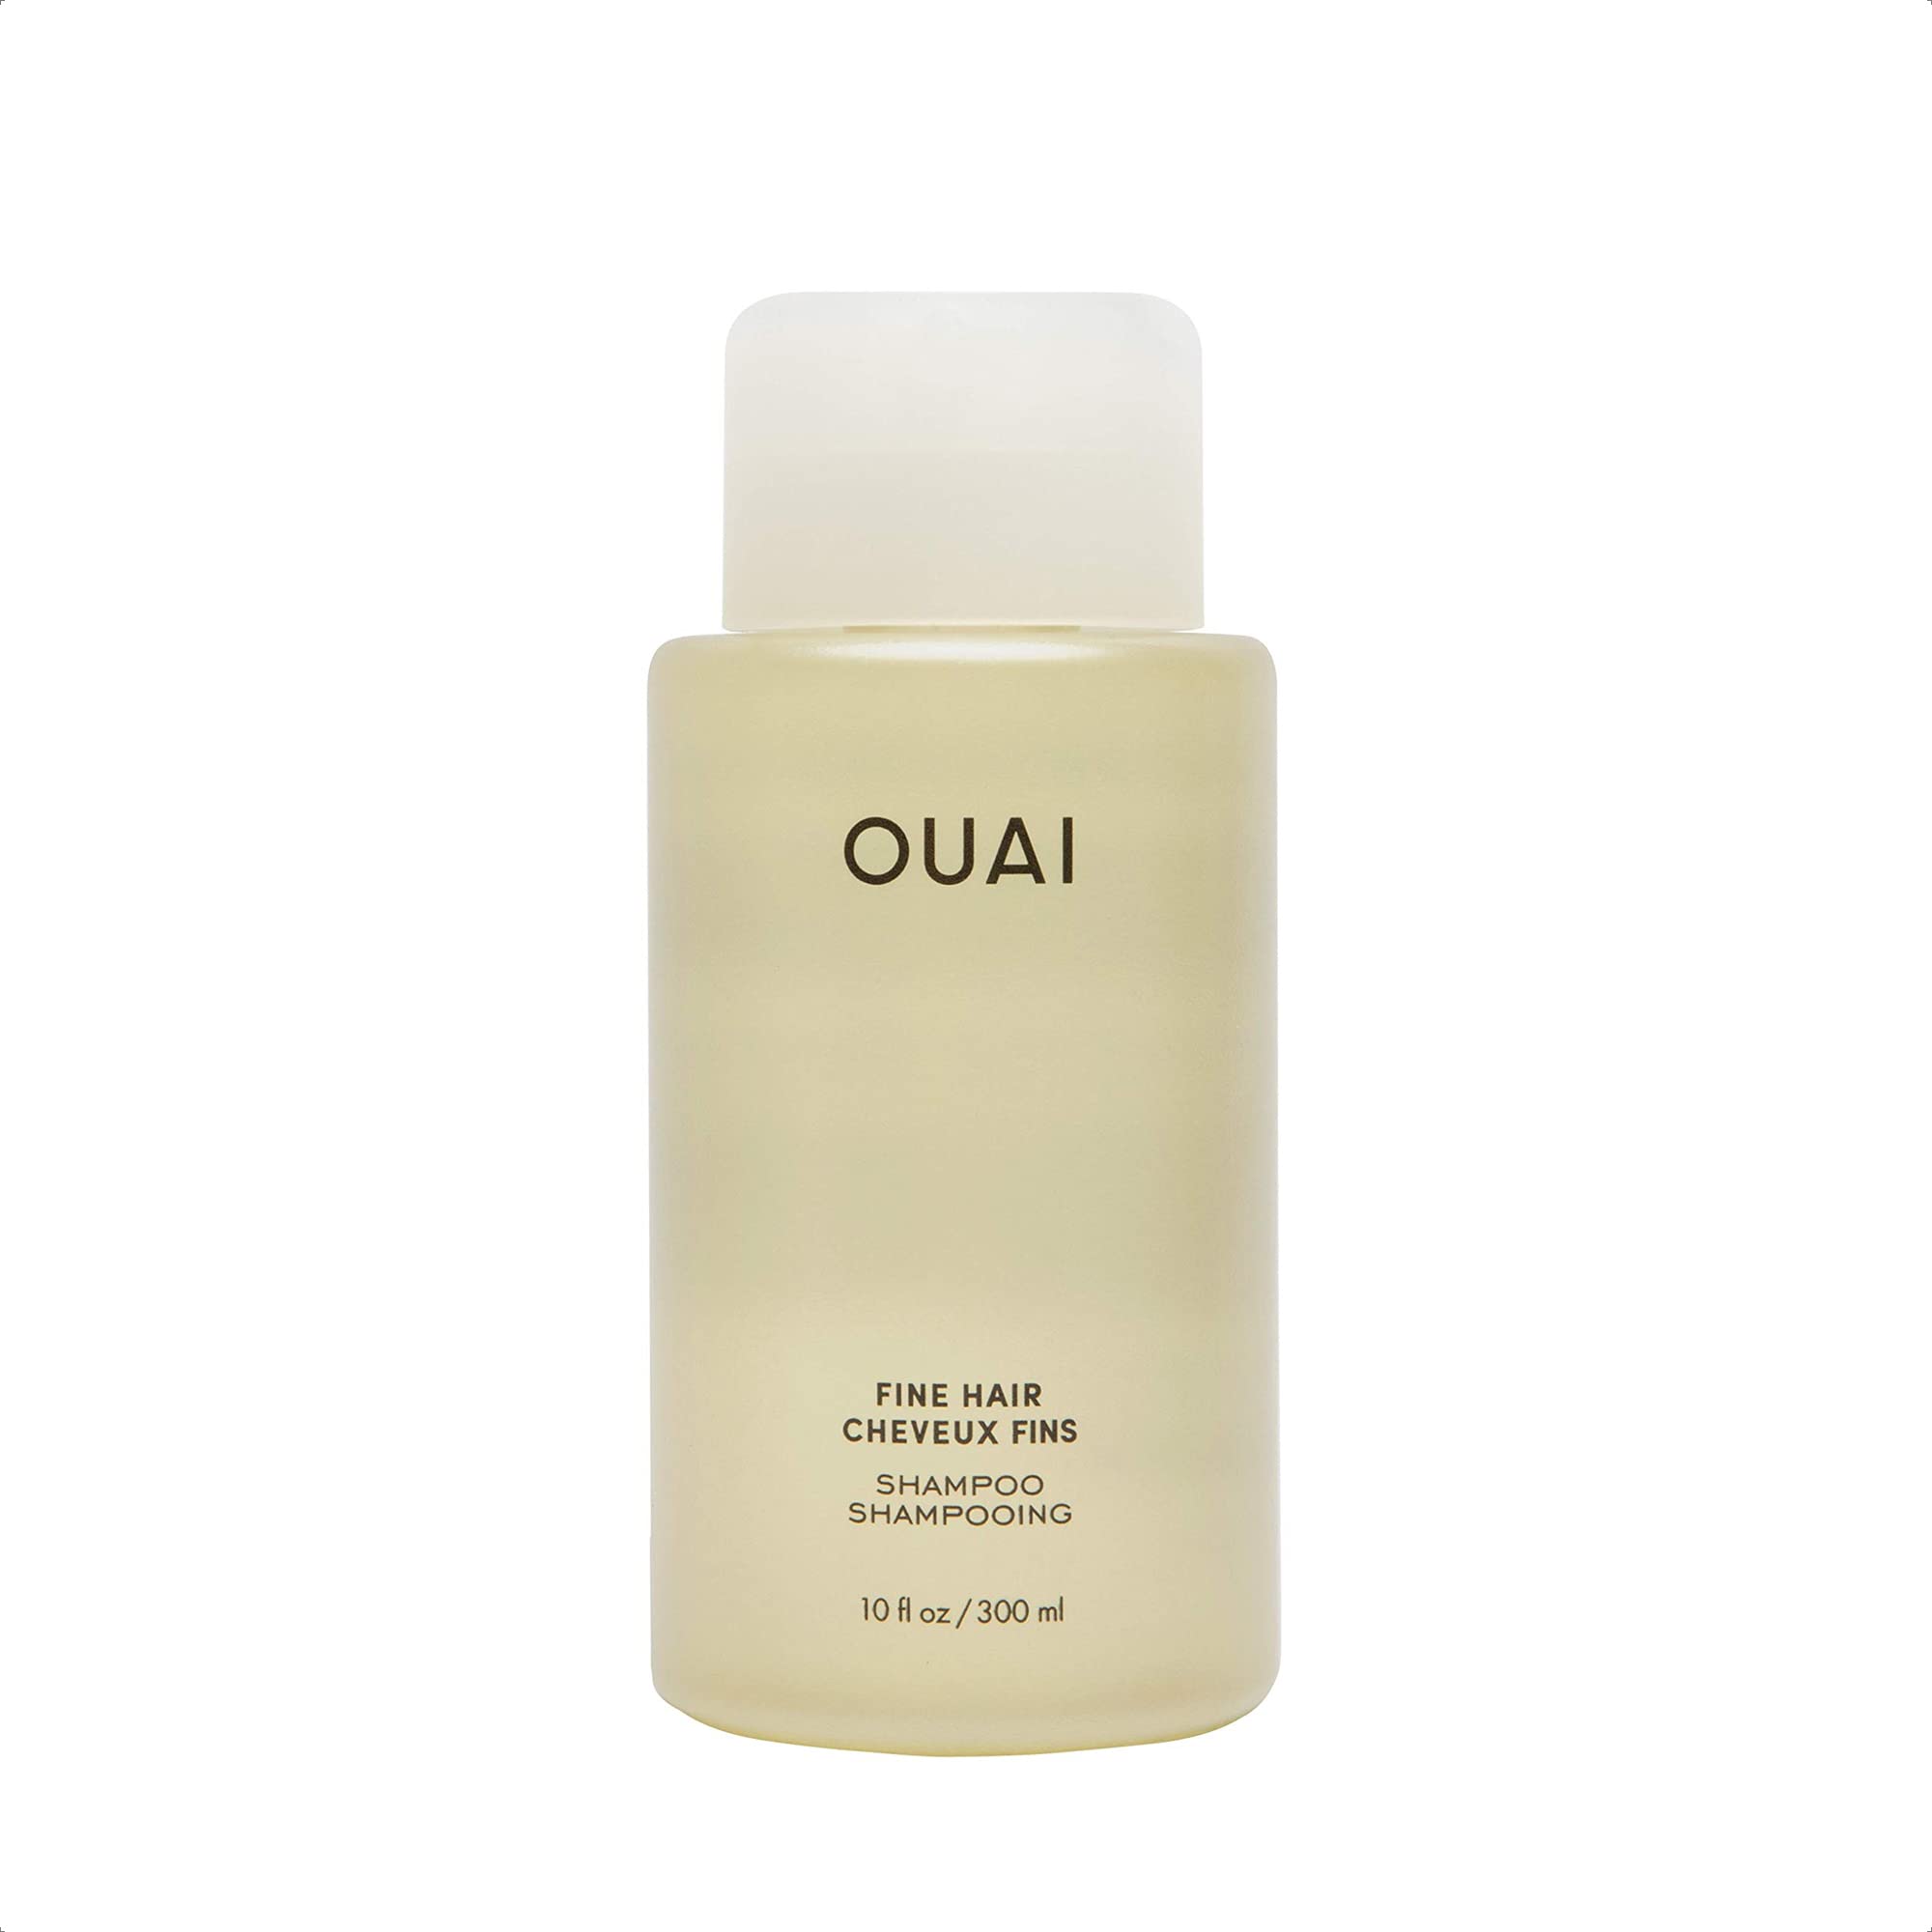 OUAI Fine Shampoo - Bring Fine Hair to the Next Level with Strengthening Keratin, Biotin & Chia Seed Oil - Delivers Clean, Bouncy & Voluminous Hair - Free of Parabens, Sulfates & Phthalates - 10 fl oz